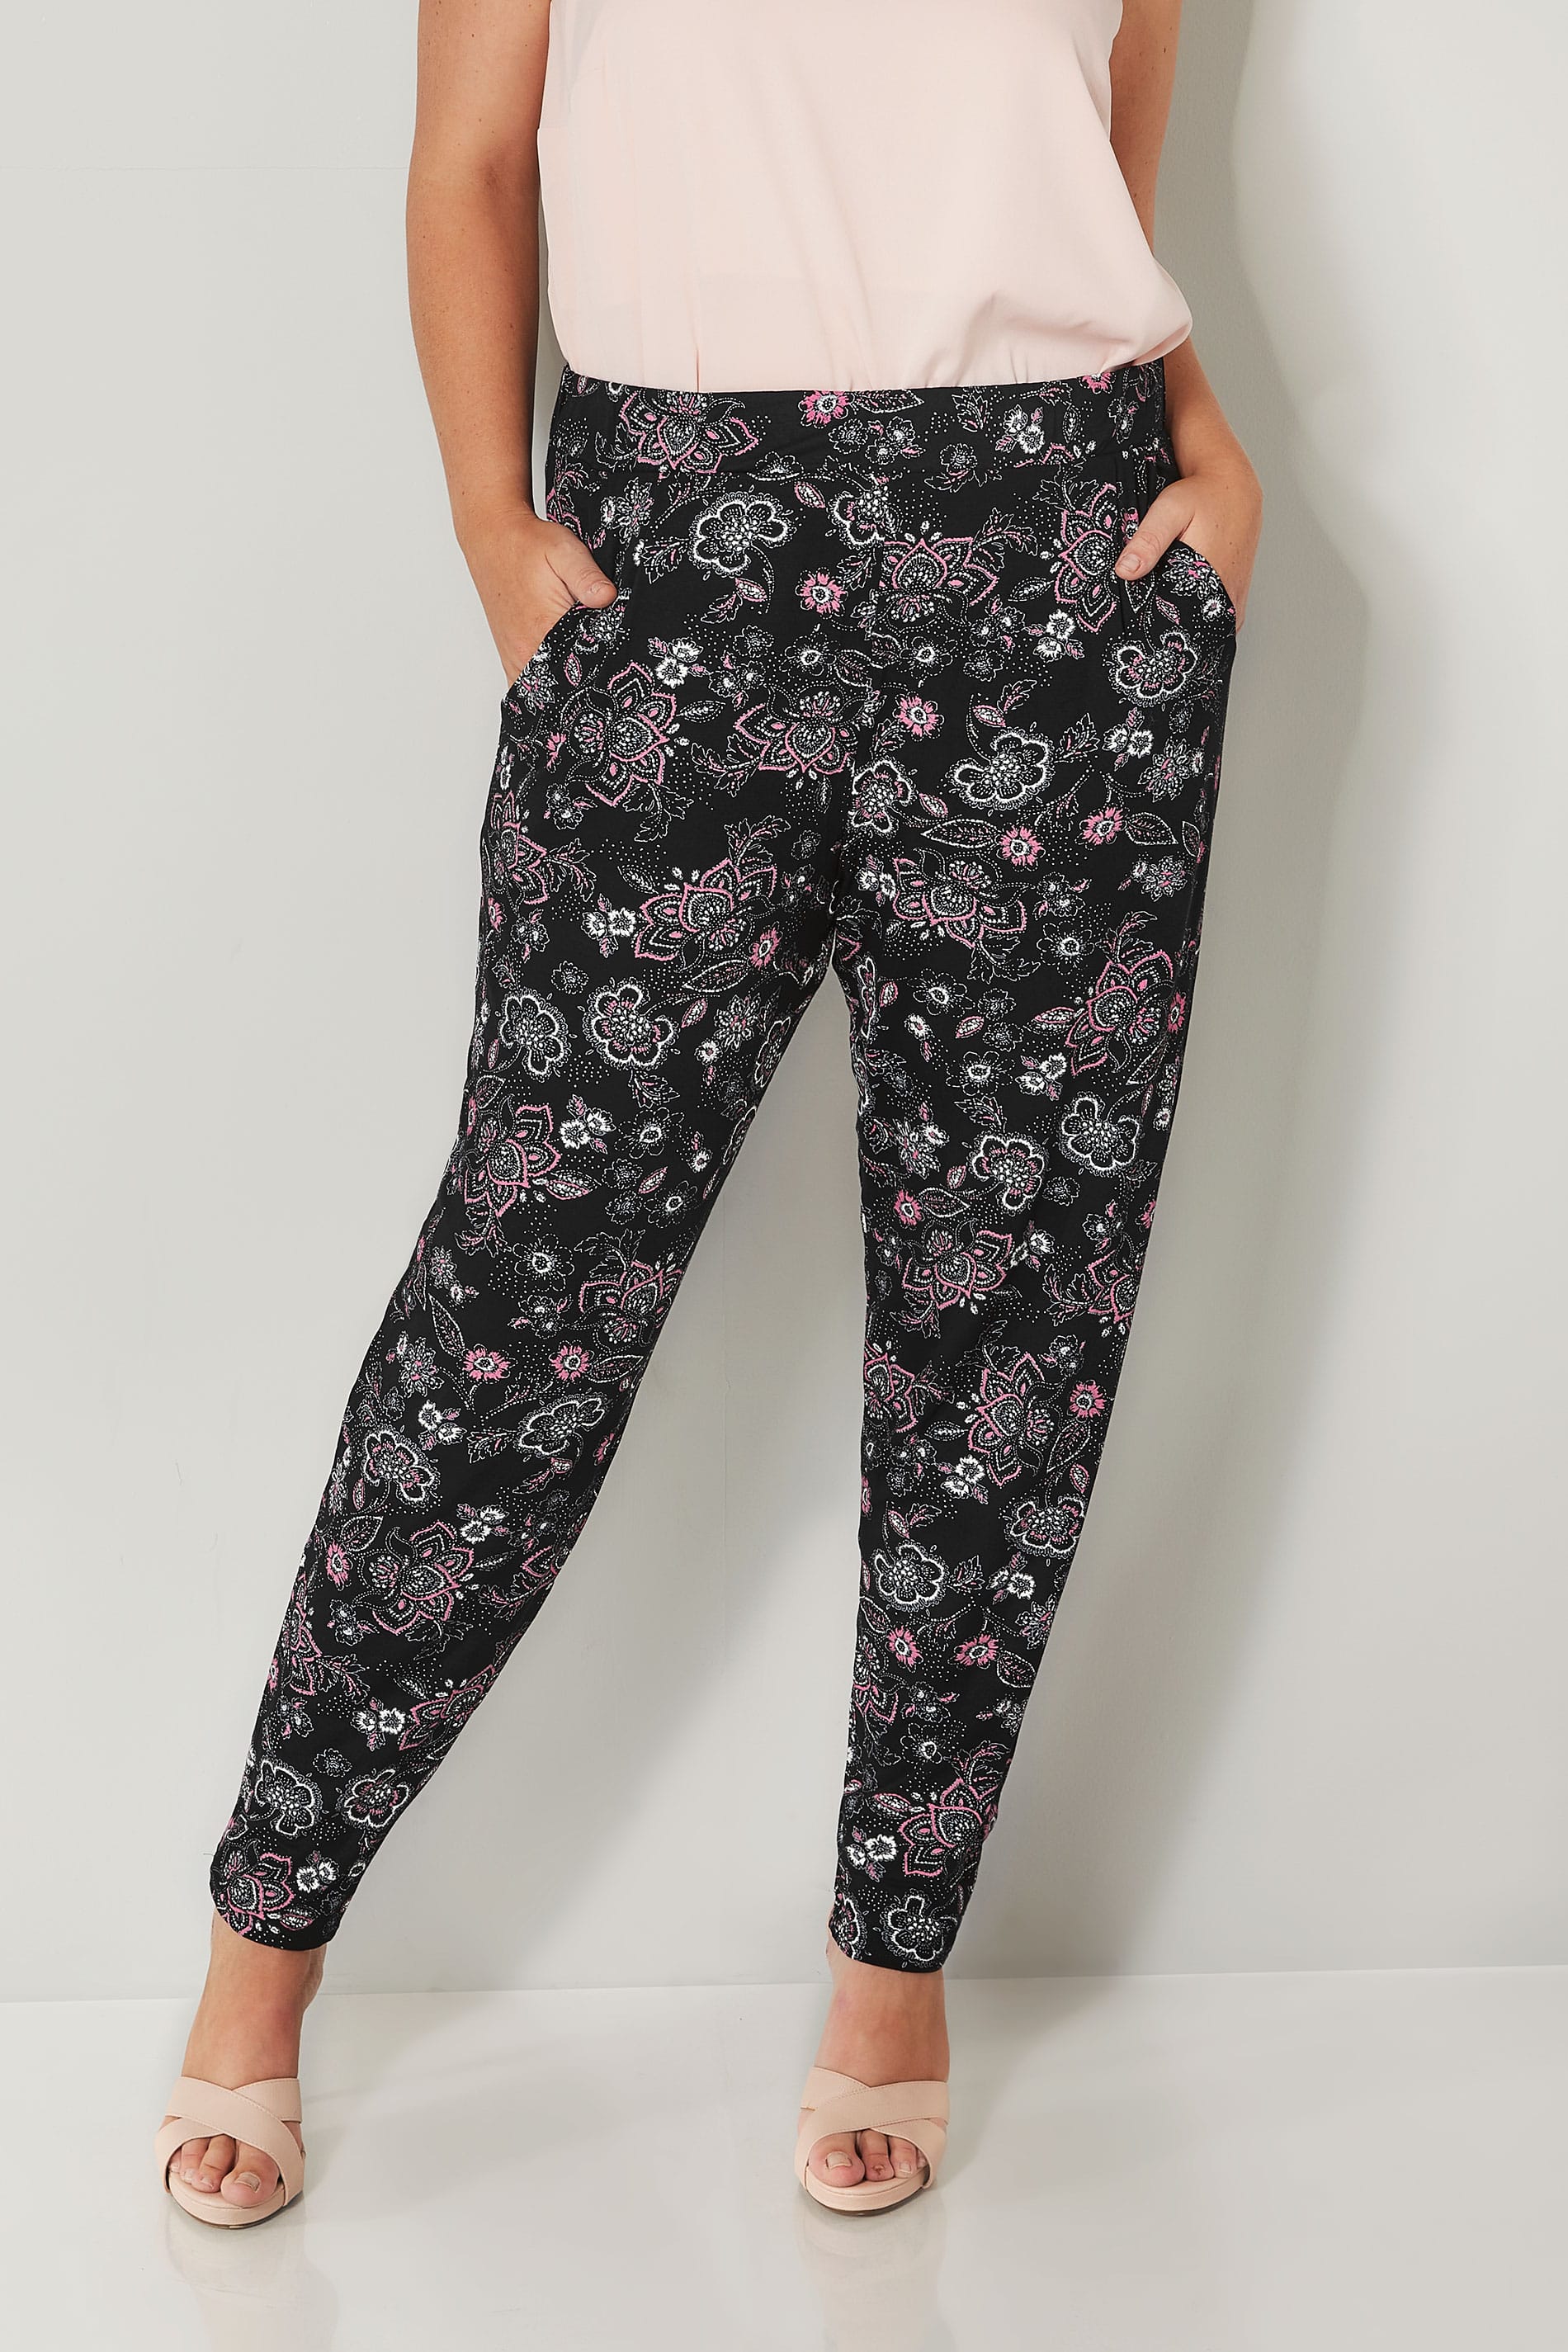 Black & Pink Floral Print Jersey Harem Trousers, plus size 16 to 36